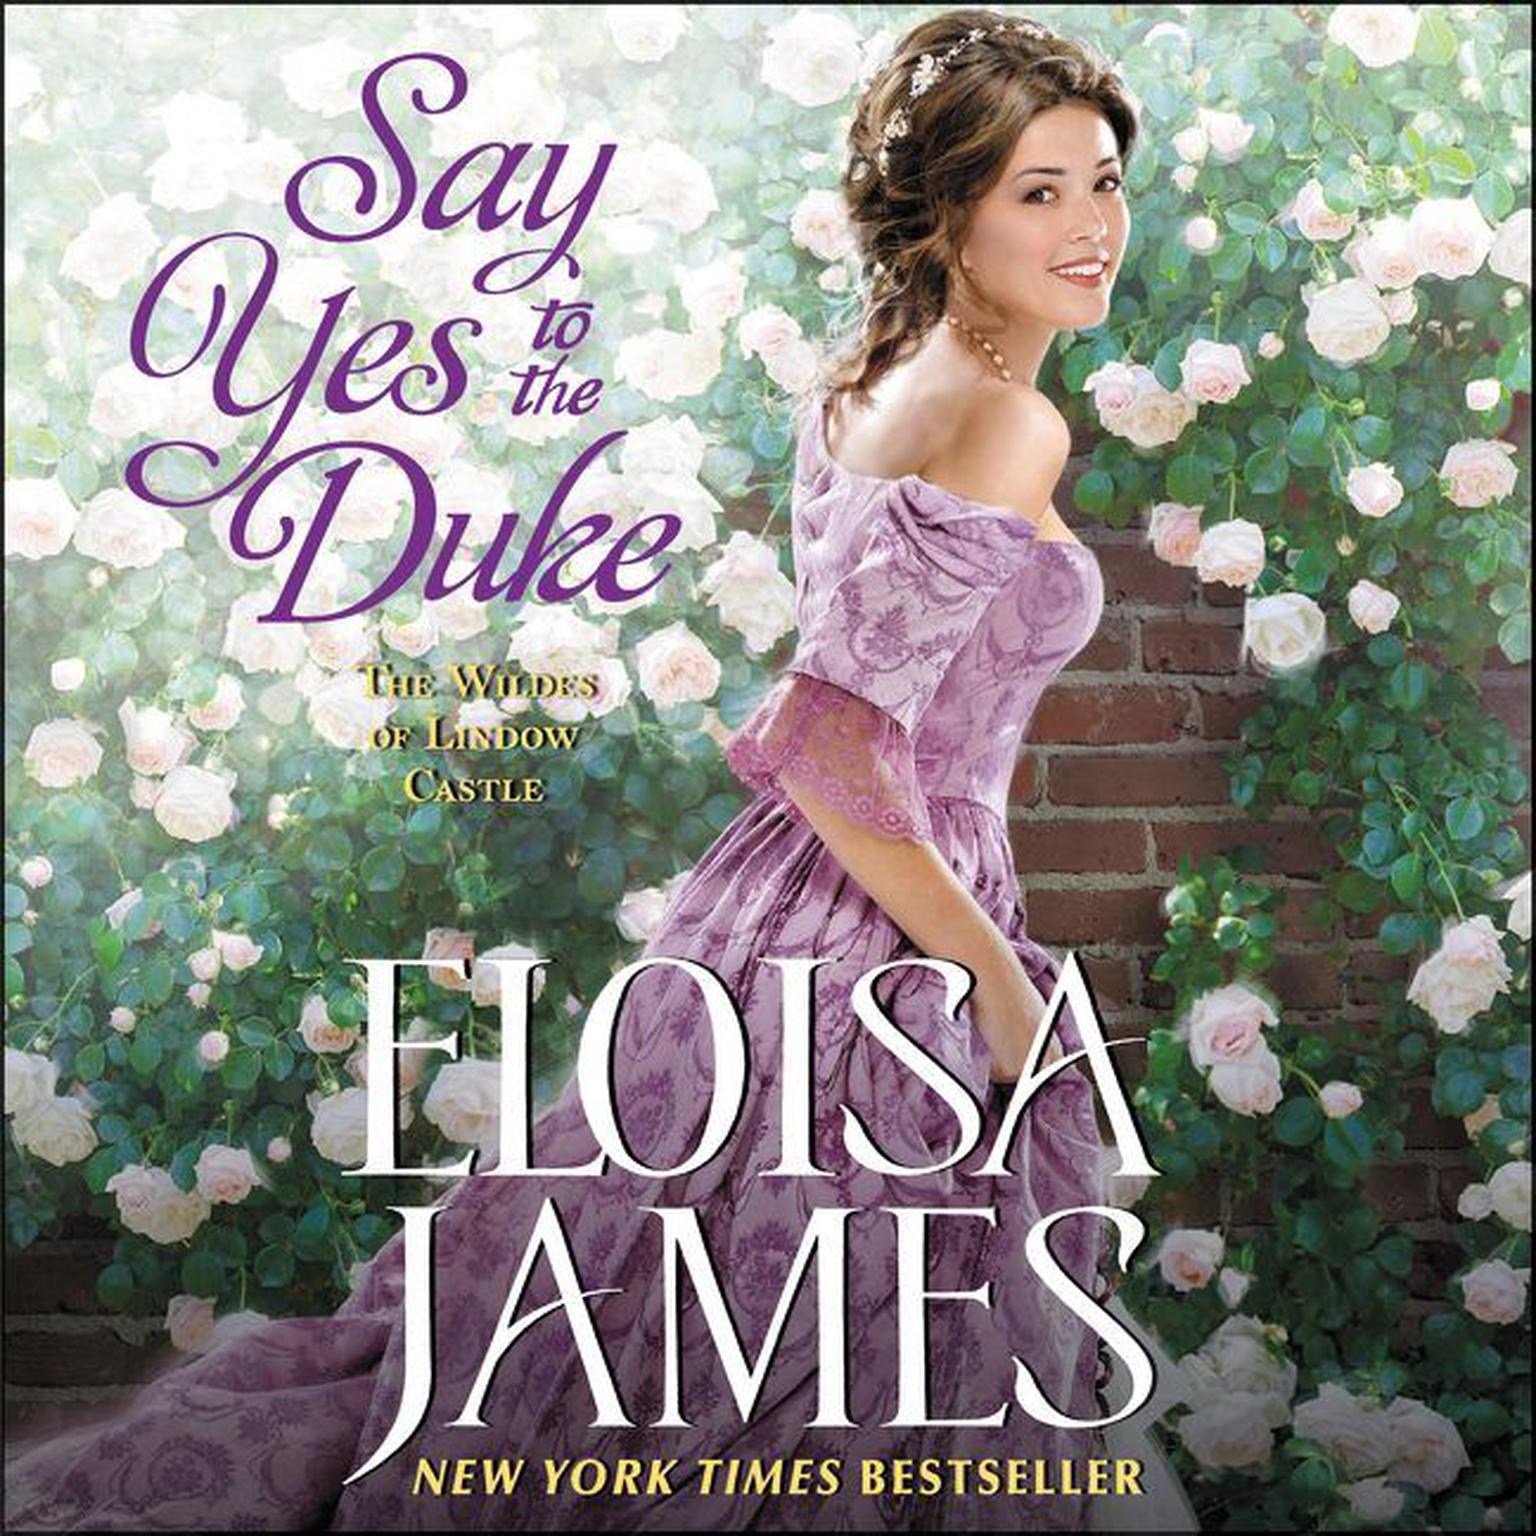 Say Yes to the Duke: The Wildes of Lindow Castle Audiobook, by Eloisa James